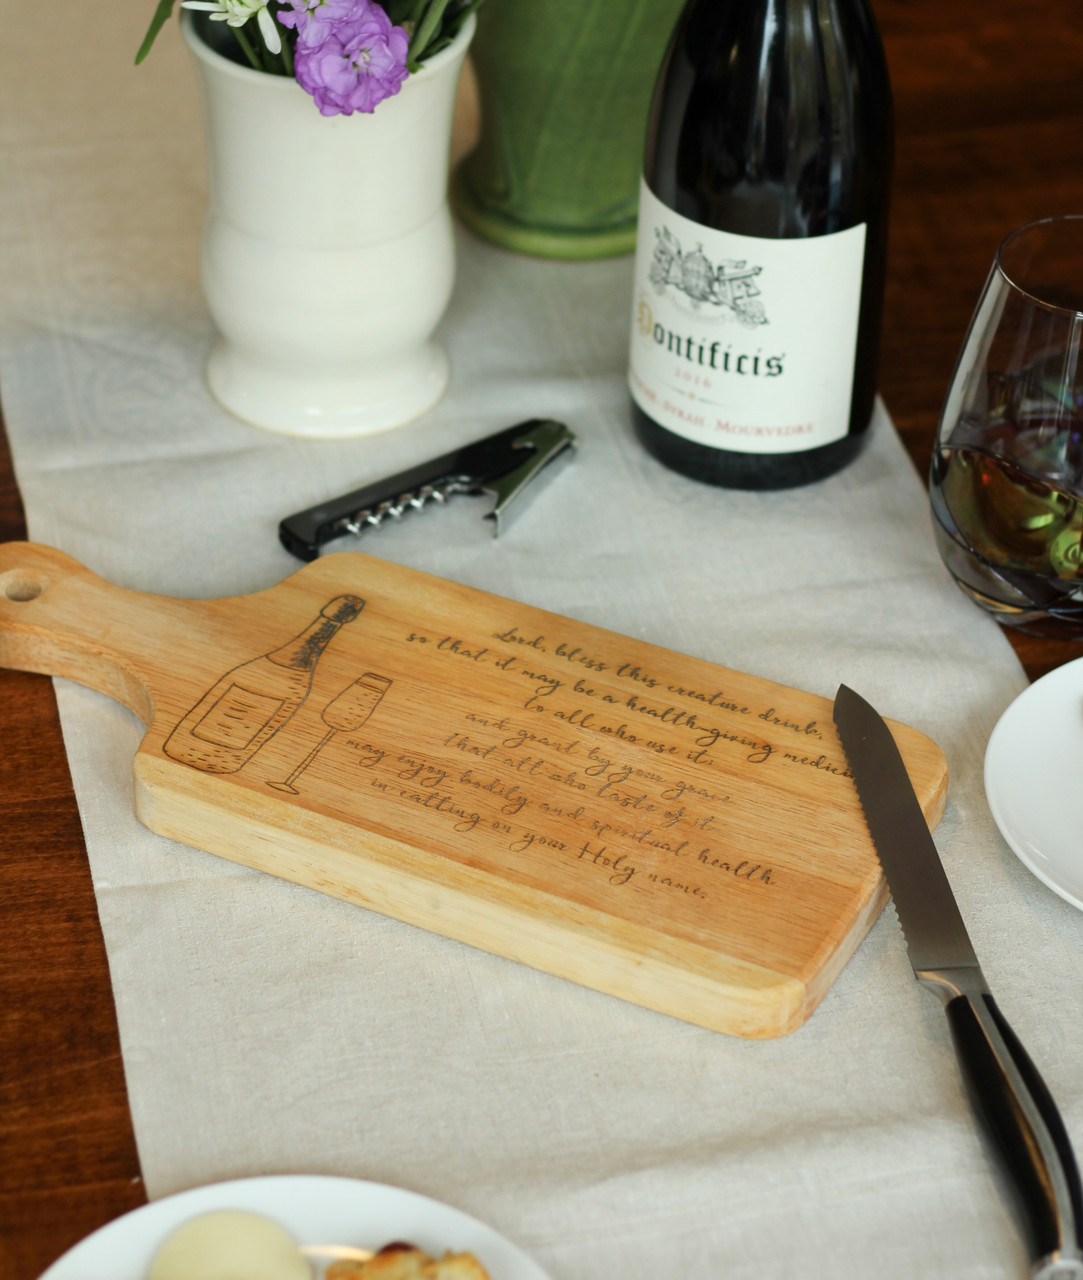 Bless This Kitchen | Personalized Cutting Boards